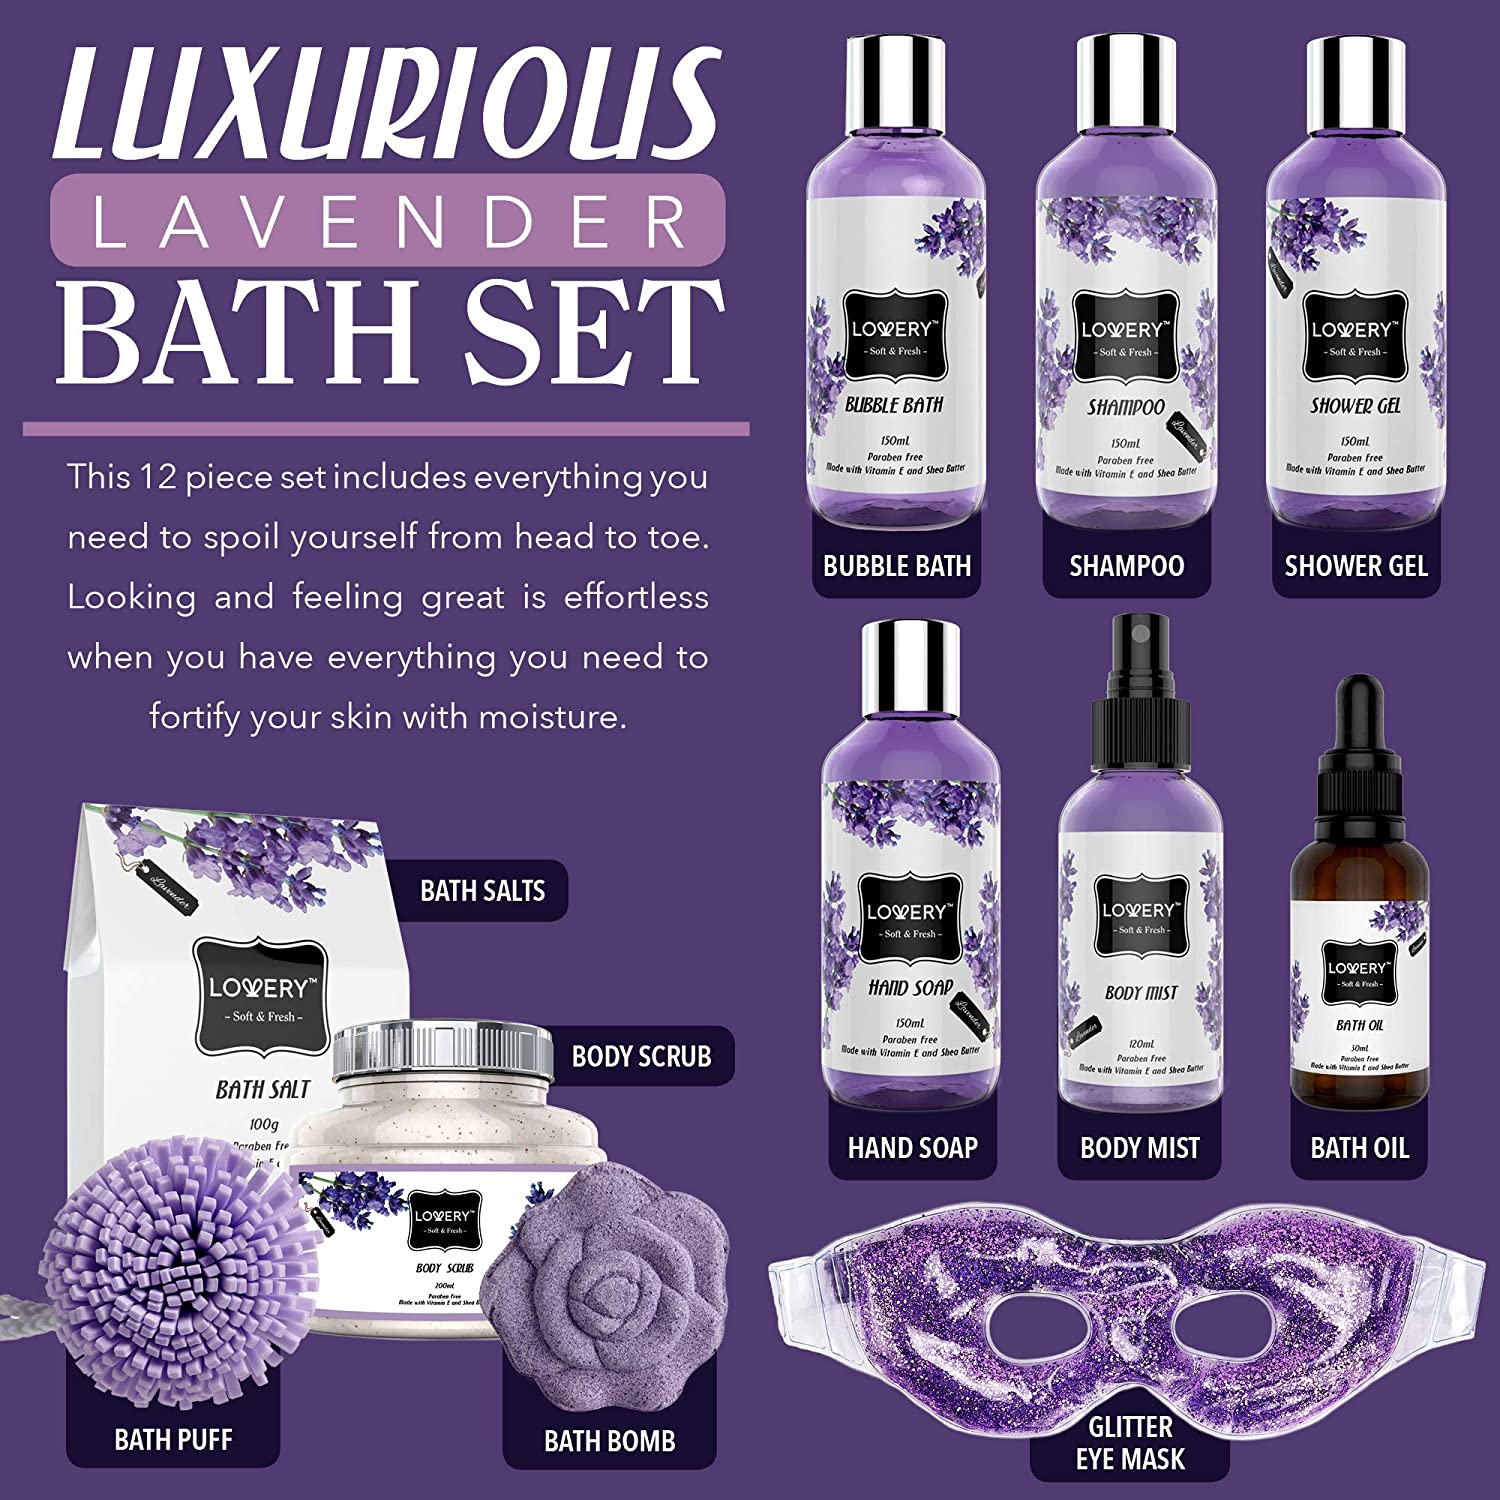 Lovery Lavender bath gift set, elegantly packaged body care essentials in purple and white, Luxurious Lavender & Silver Design, Soft & Fresh Aroma Products, Premium Bath Oil and Body Scrub, Decorative Lavender Ribbon Detailing, Exquisite Bathing Experience Enhancer, Ideal for Spa-Like Relaxation, Paraben-Free Bath Essentials, Cruelty-Free Body Care Selection, Presented in a Sophisticated Purple Mesh Basket with Lavender Accents